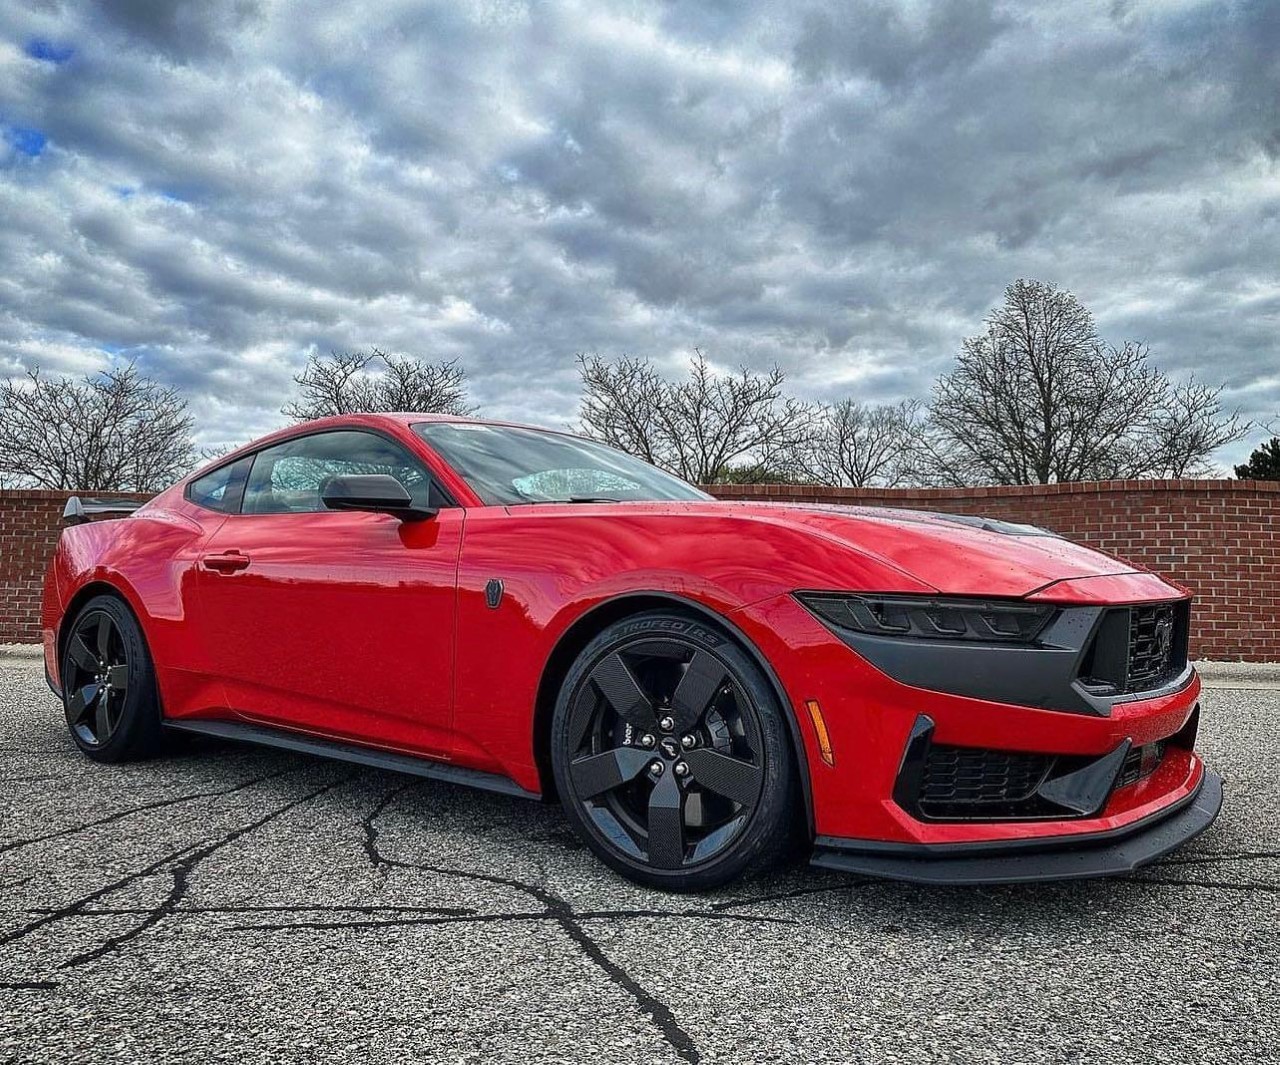 S650 Mustang S650 on Social Media dh_red